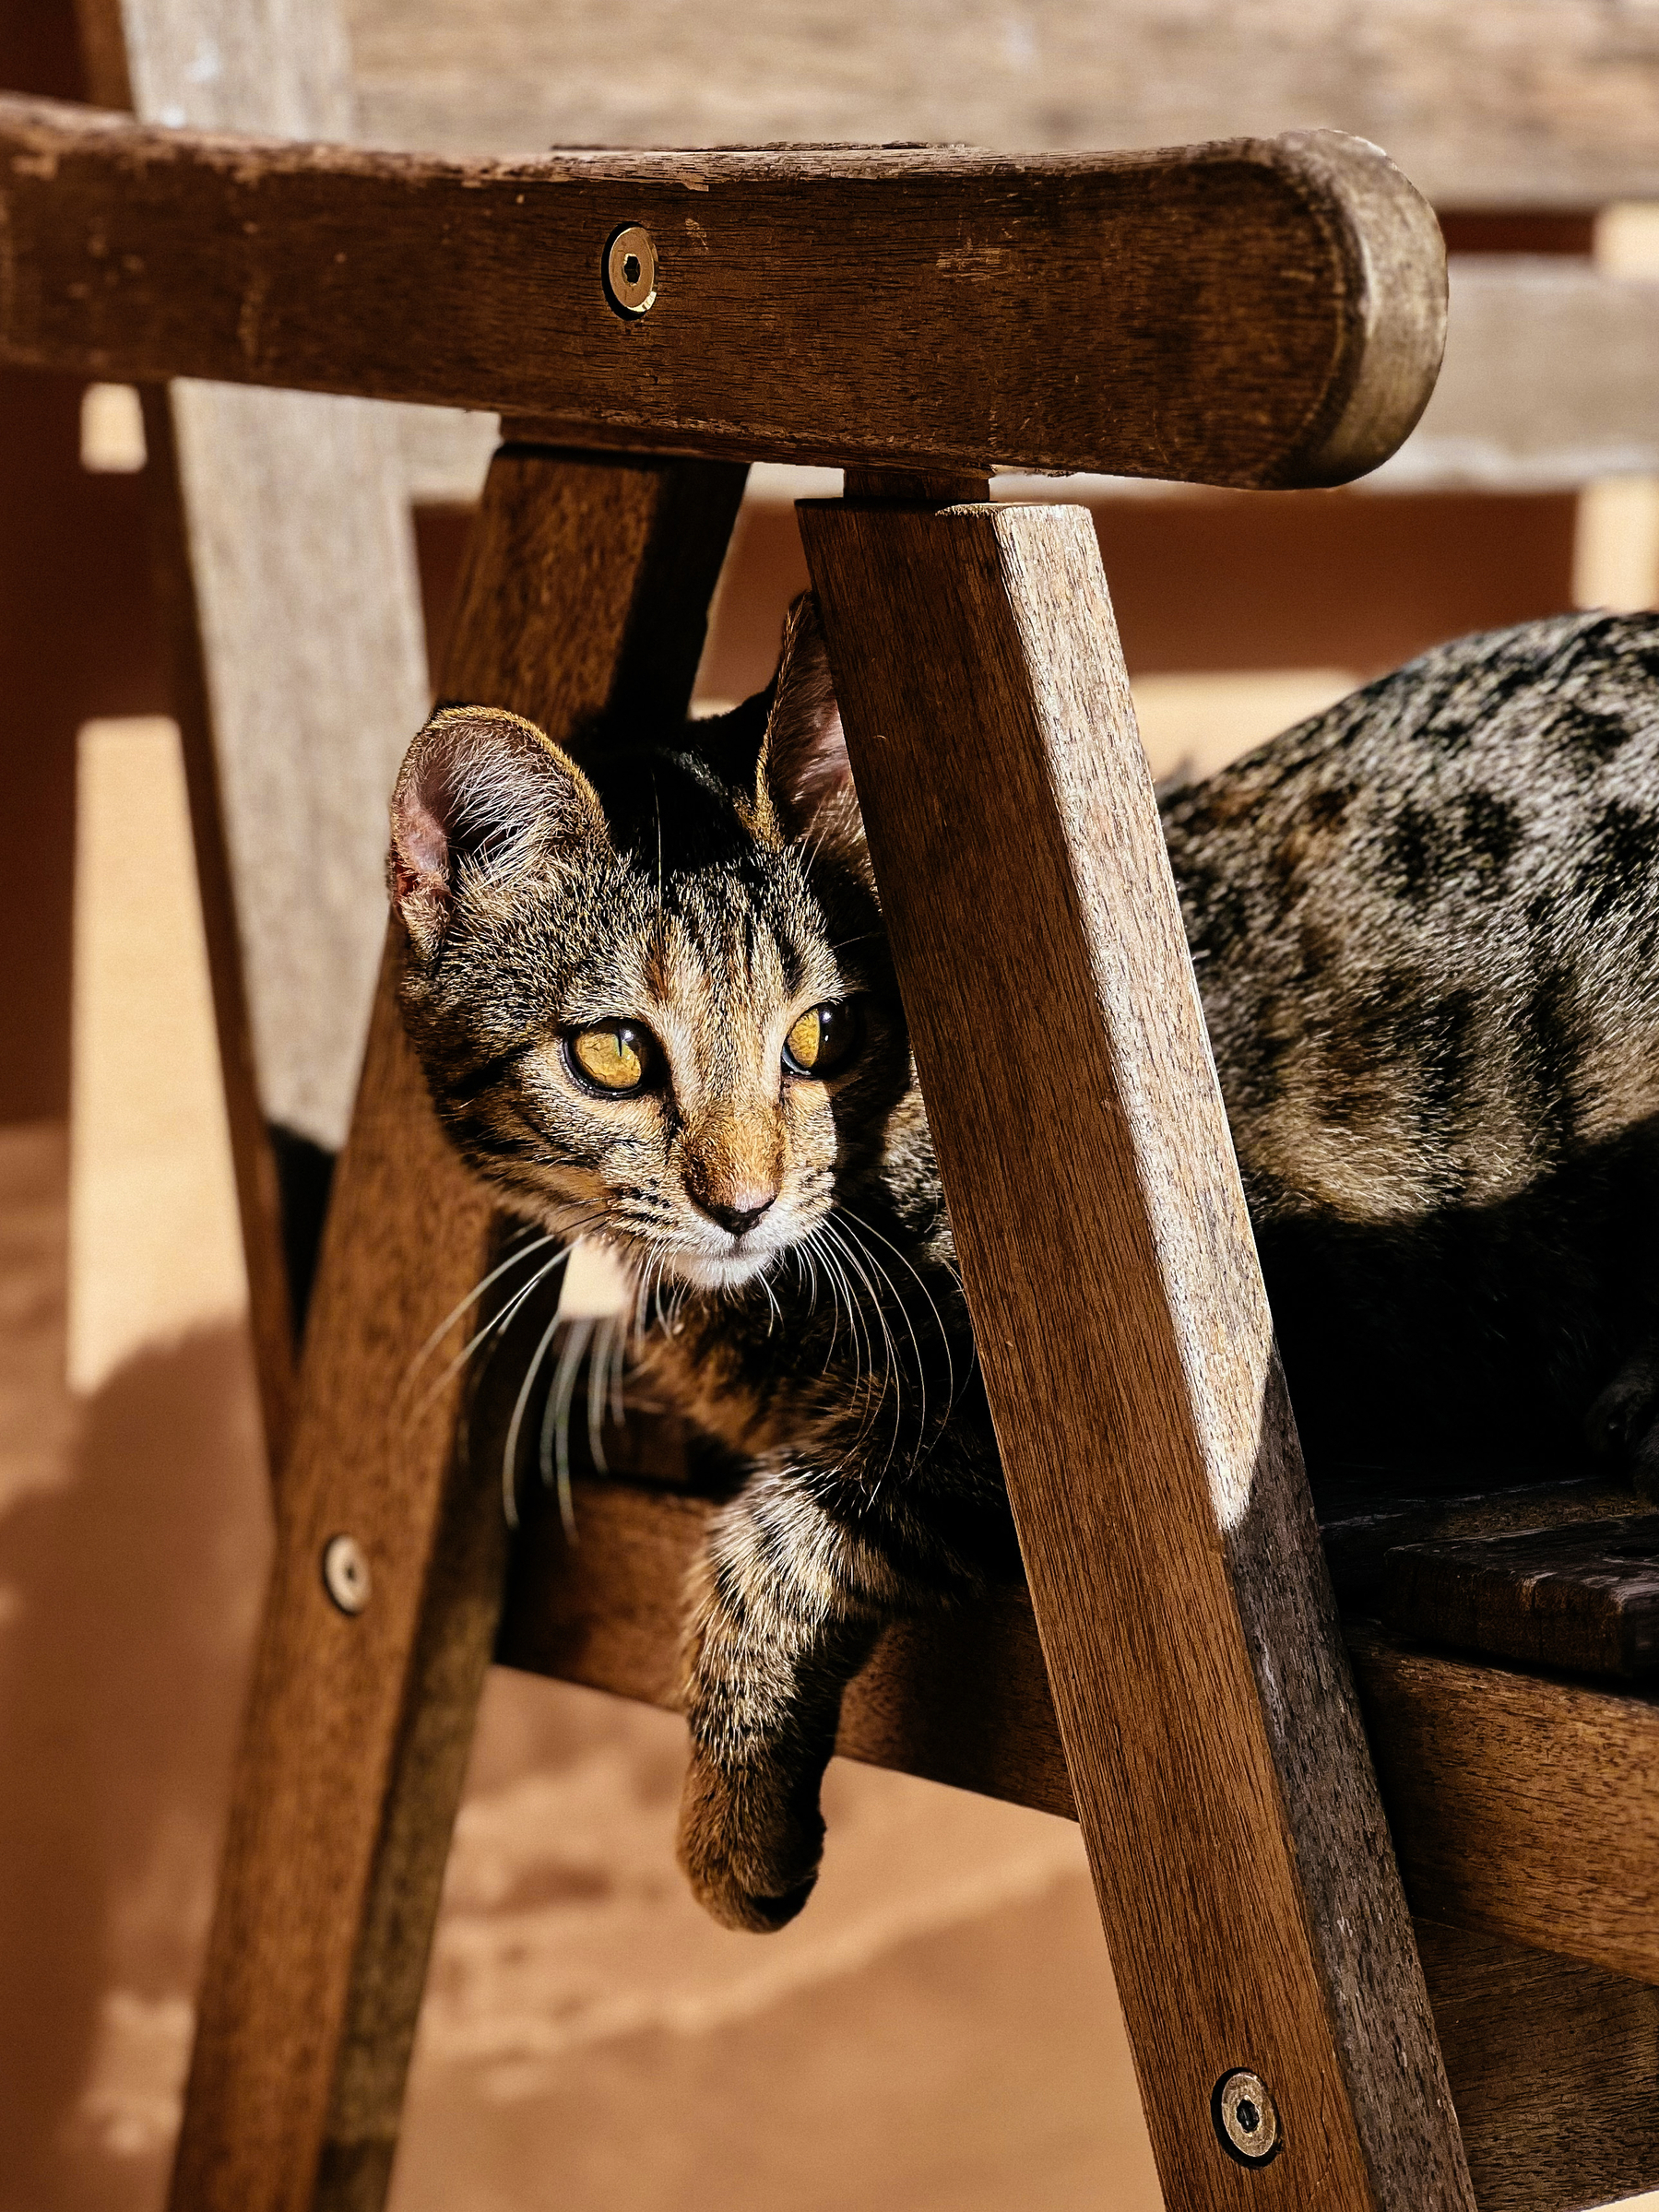 A cat sitting on a wooden chair